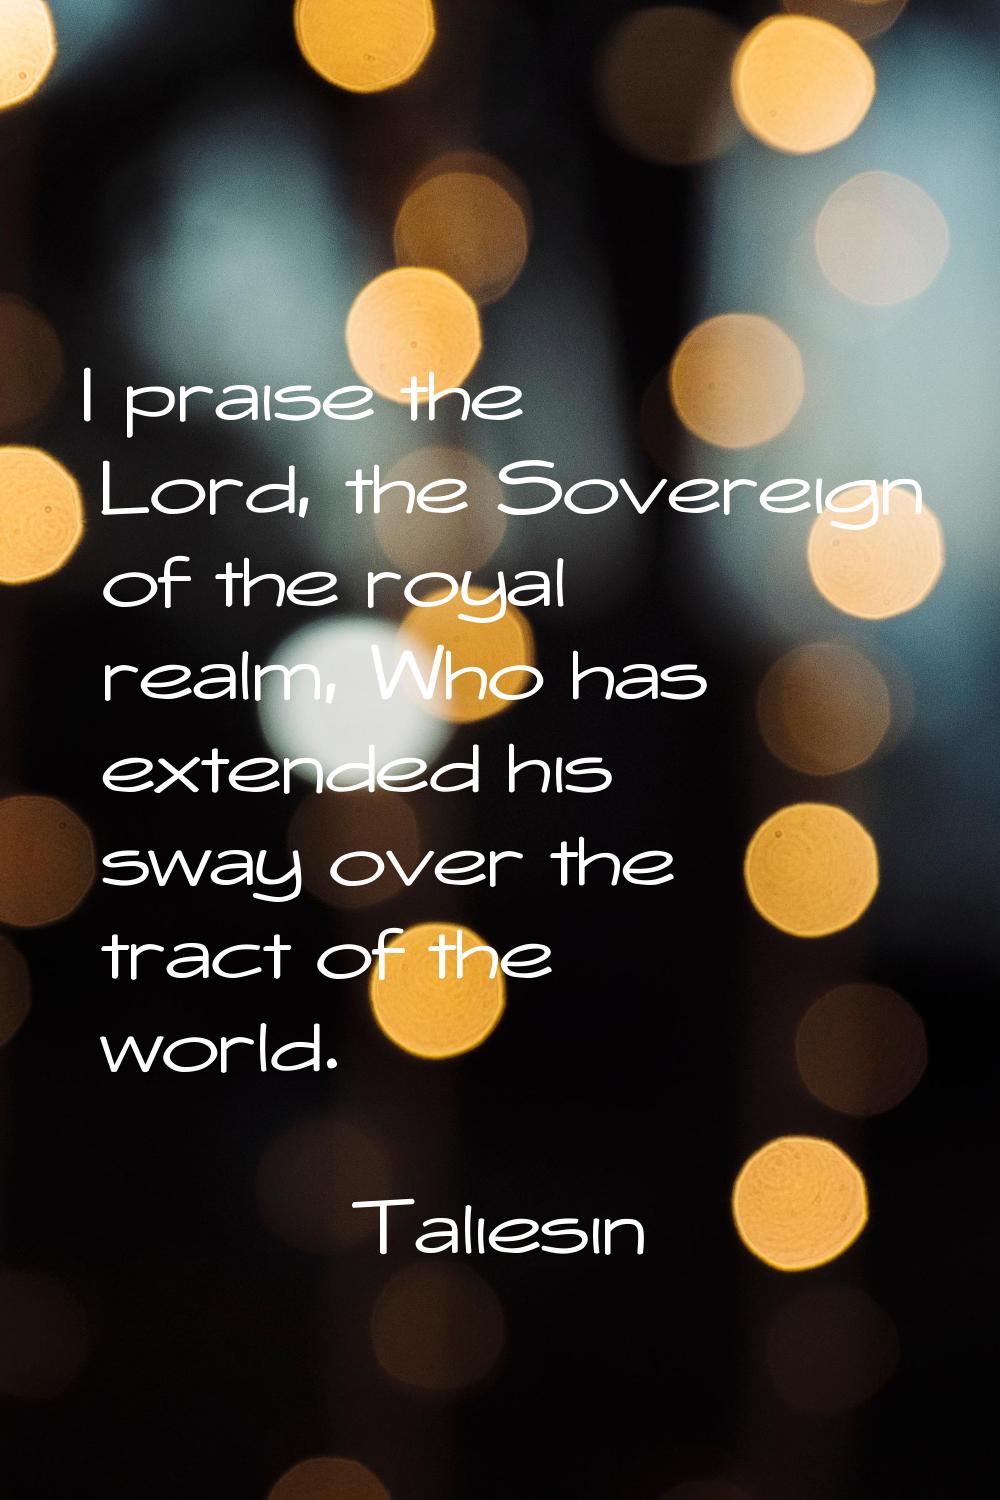 I praise the Lord, the Sovereign of the royal realm, Who has extended his sway over the tract of th